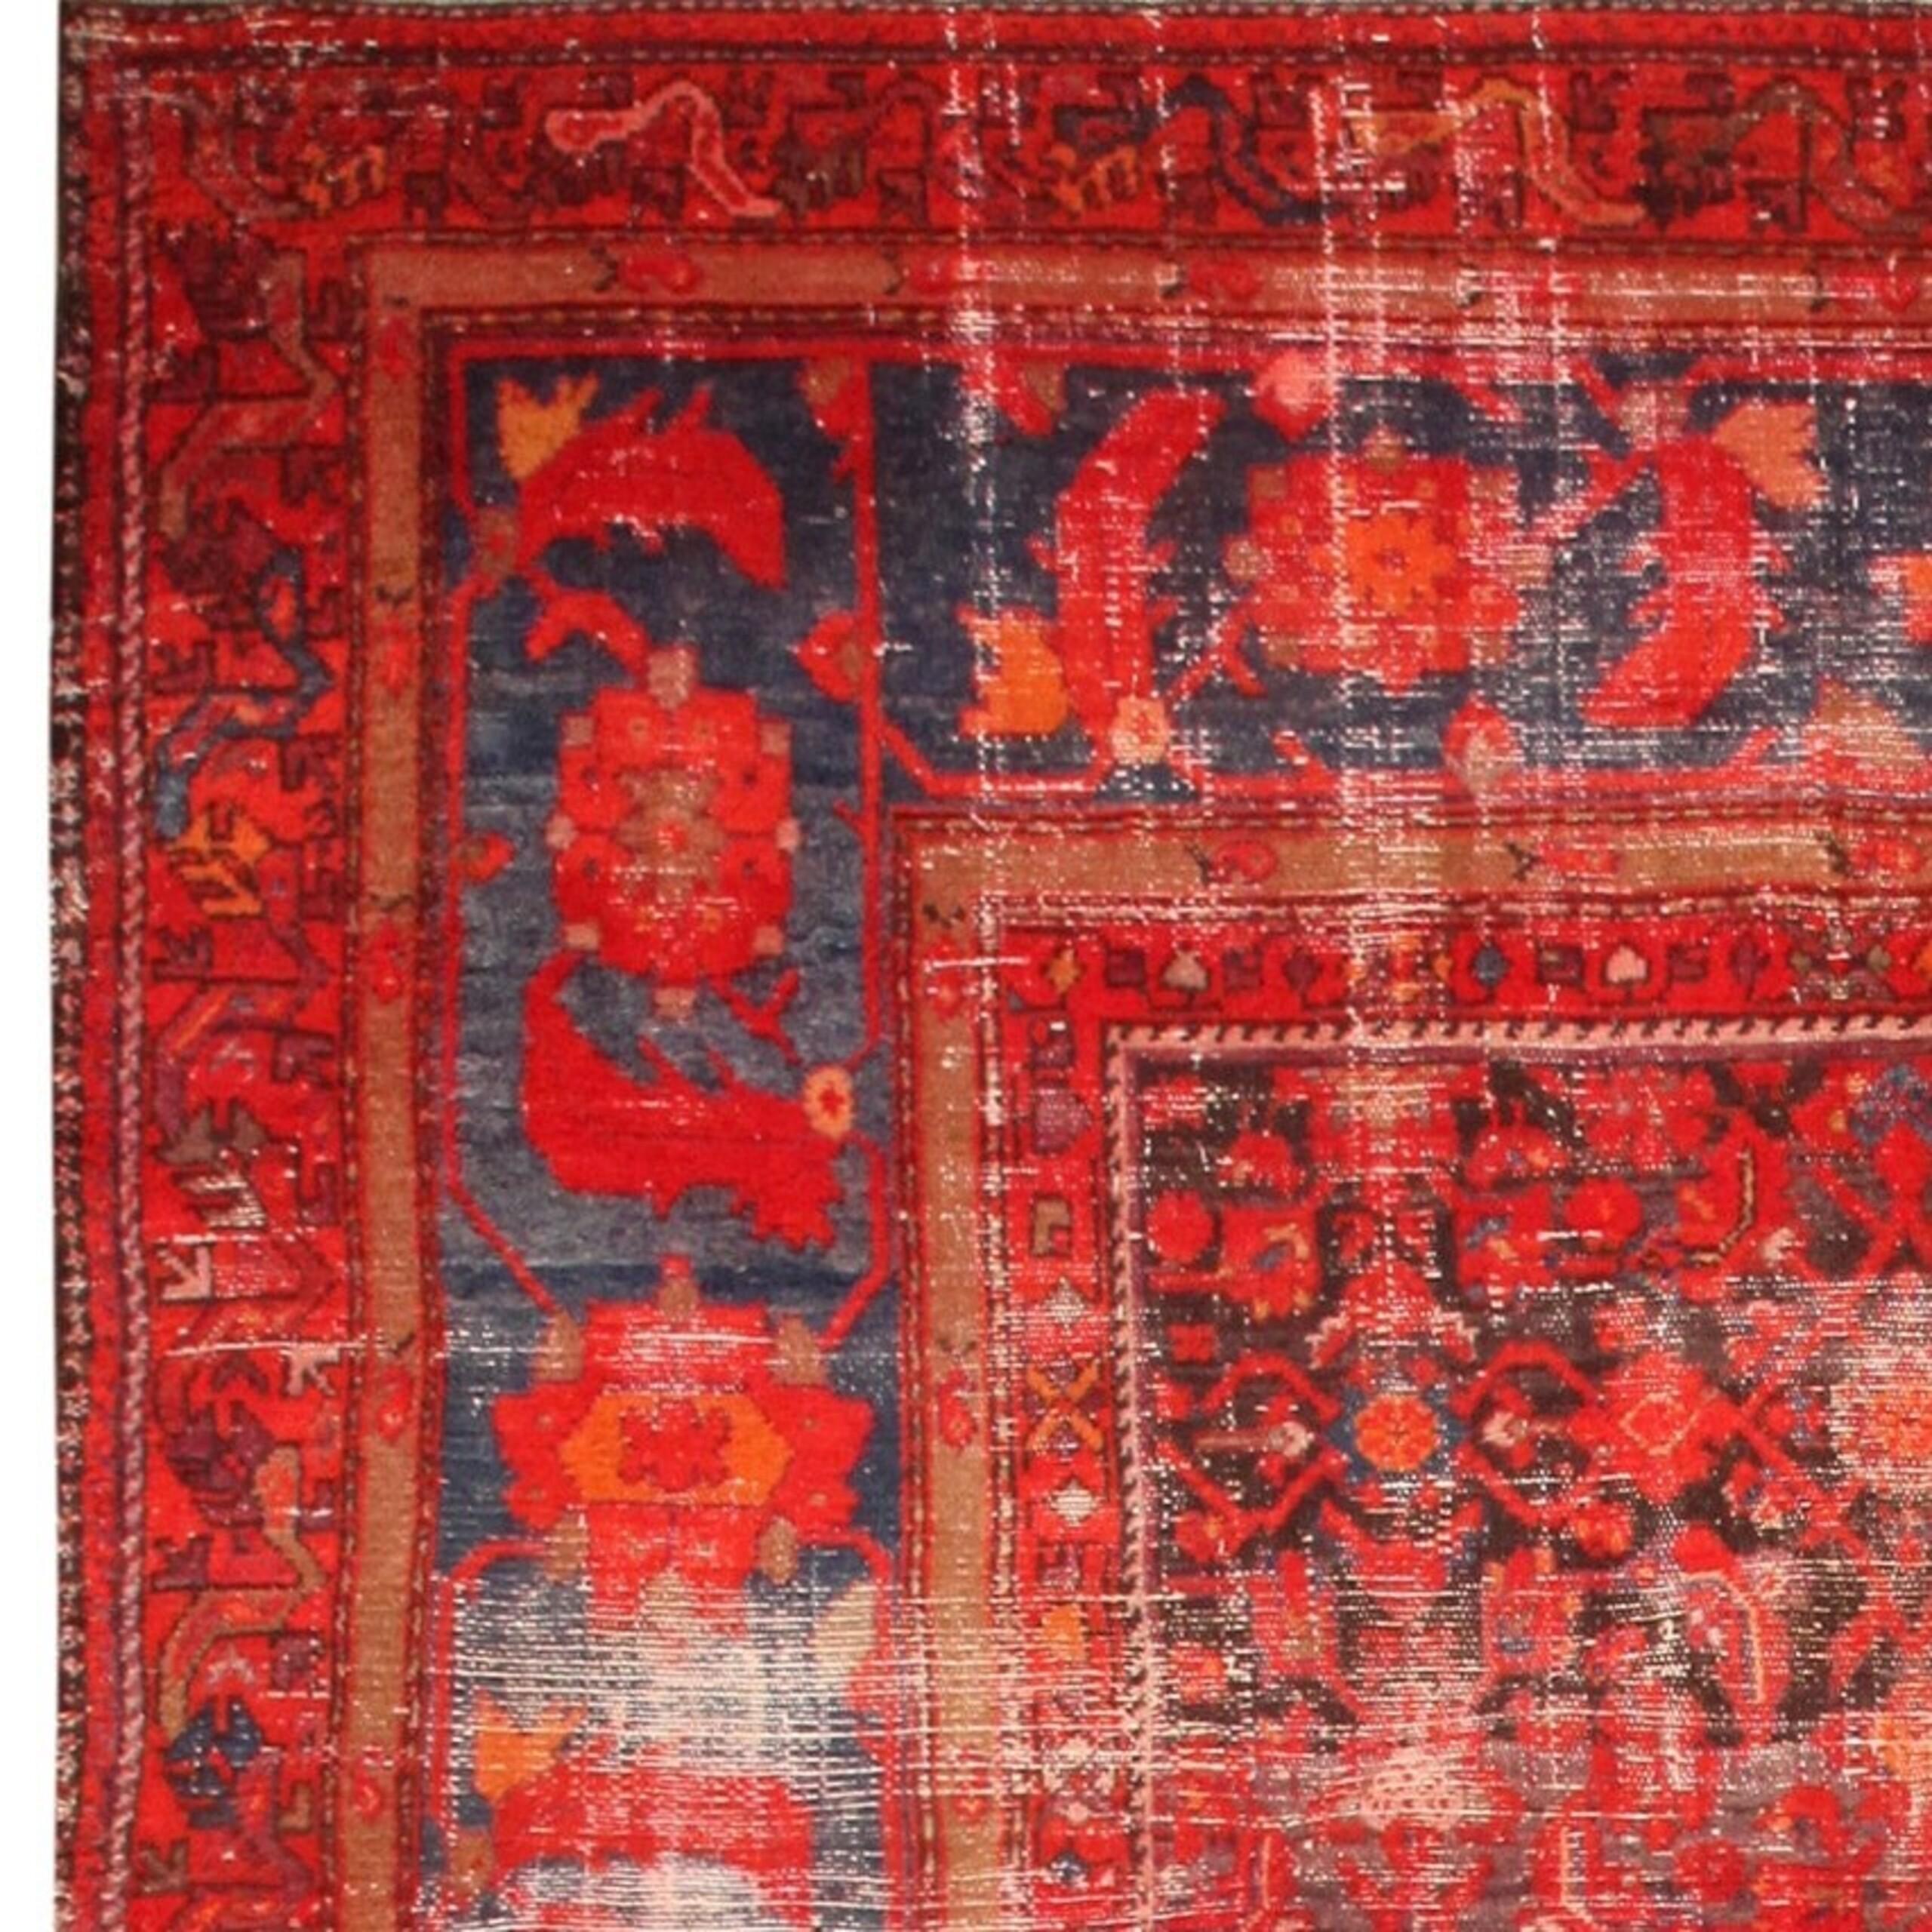 Large Shabby Chic Antique Persian Malayer Rug, Country of Origin / rug type: Persian rug, Circa date: 1900. Size: 12 ft 8 in x 19 ft 9 in (3.86 m x 6.01 m). 